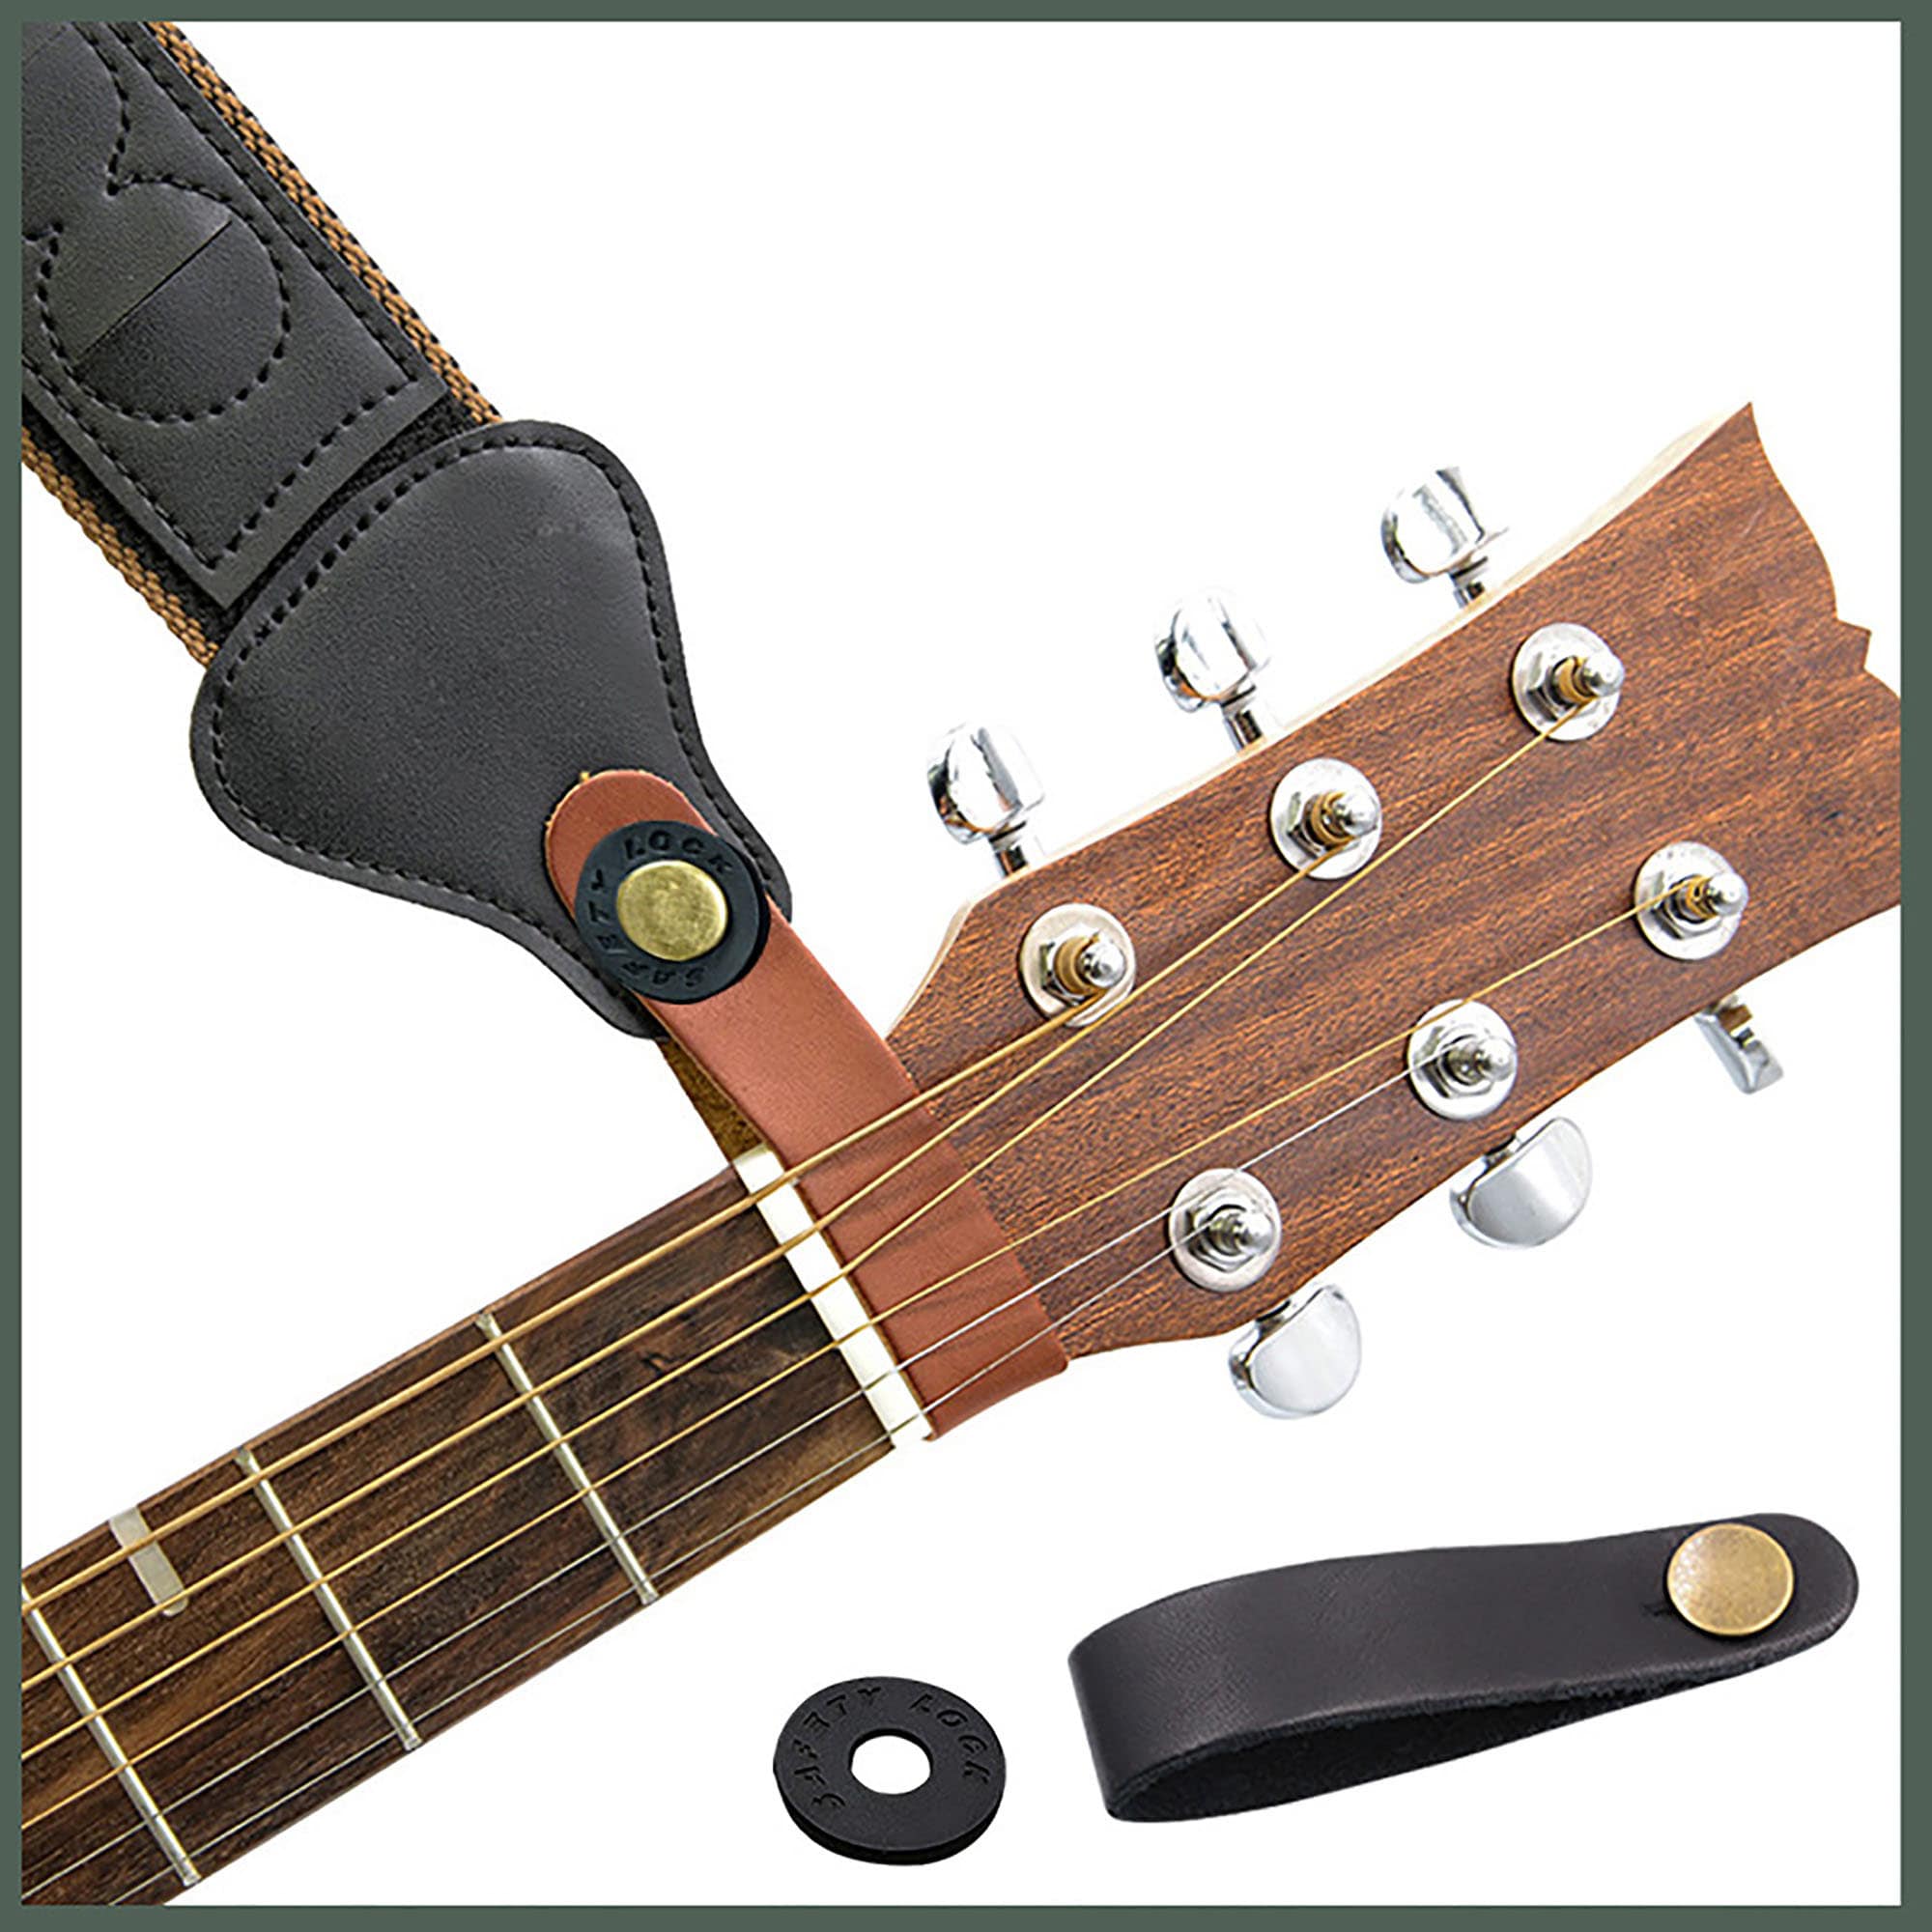 Black Healifty Guitar Neck Strap Star Button Leather Guitar Headstock Strap Tie Guitar Hanger for Electric Acoustic Guitar Ukulele Bass 